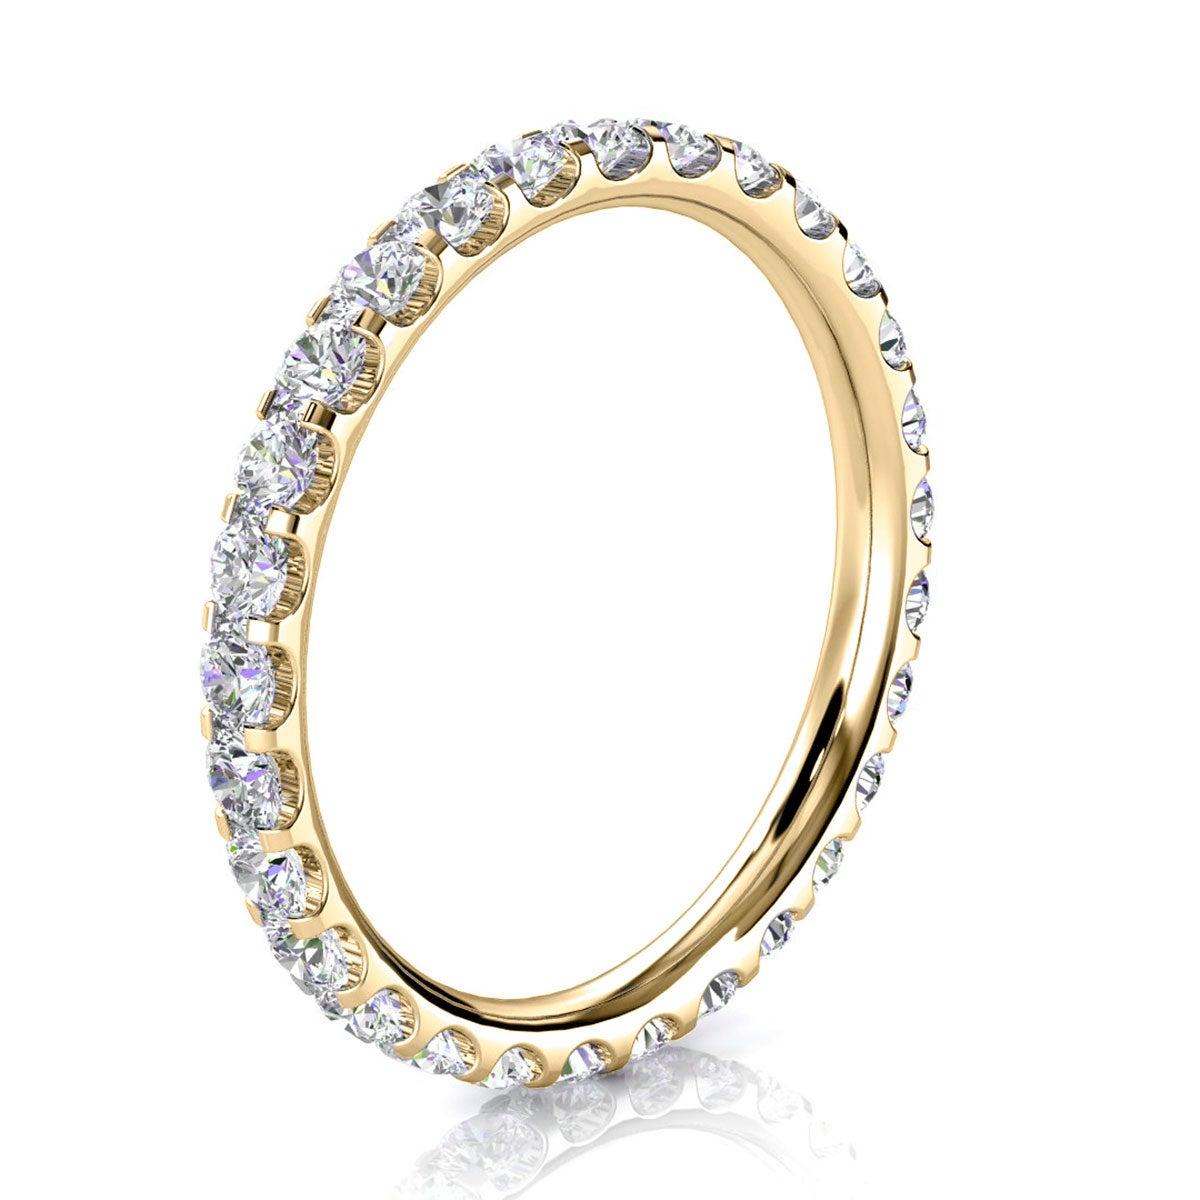 For Sale:  14k Yellow Gold Viola Eternity Micro-Prong Diamond Ring '3/4 Ct. Tw' 2